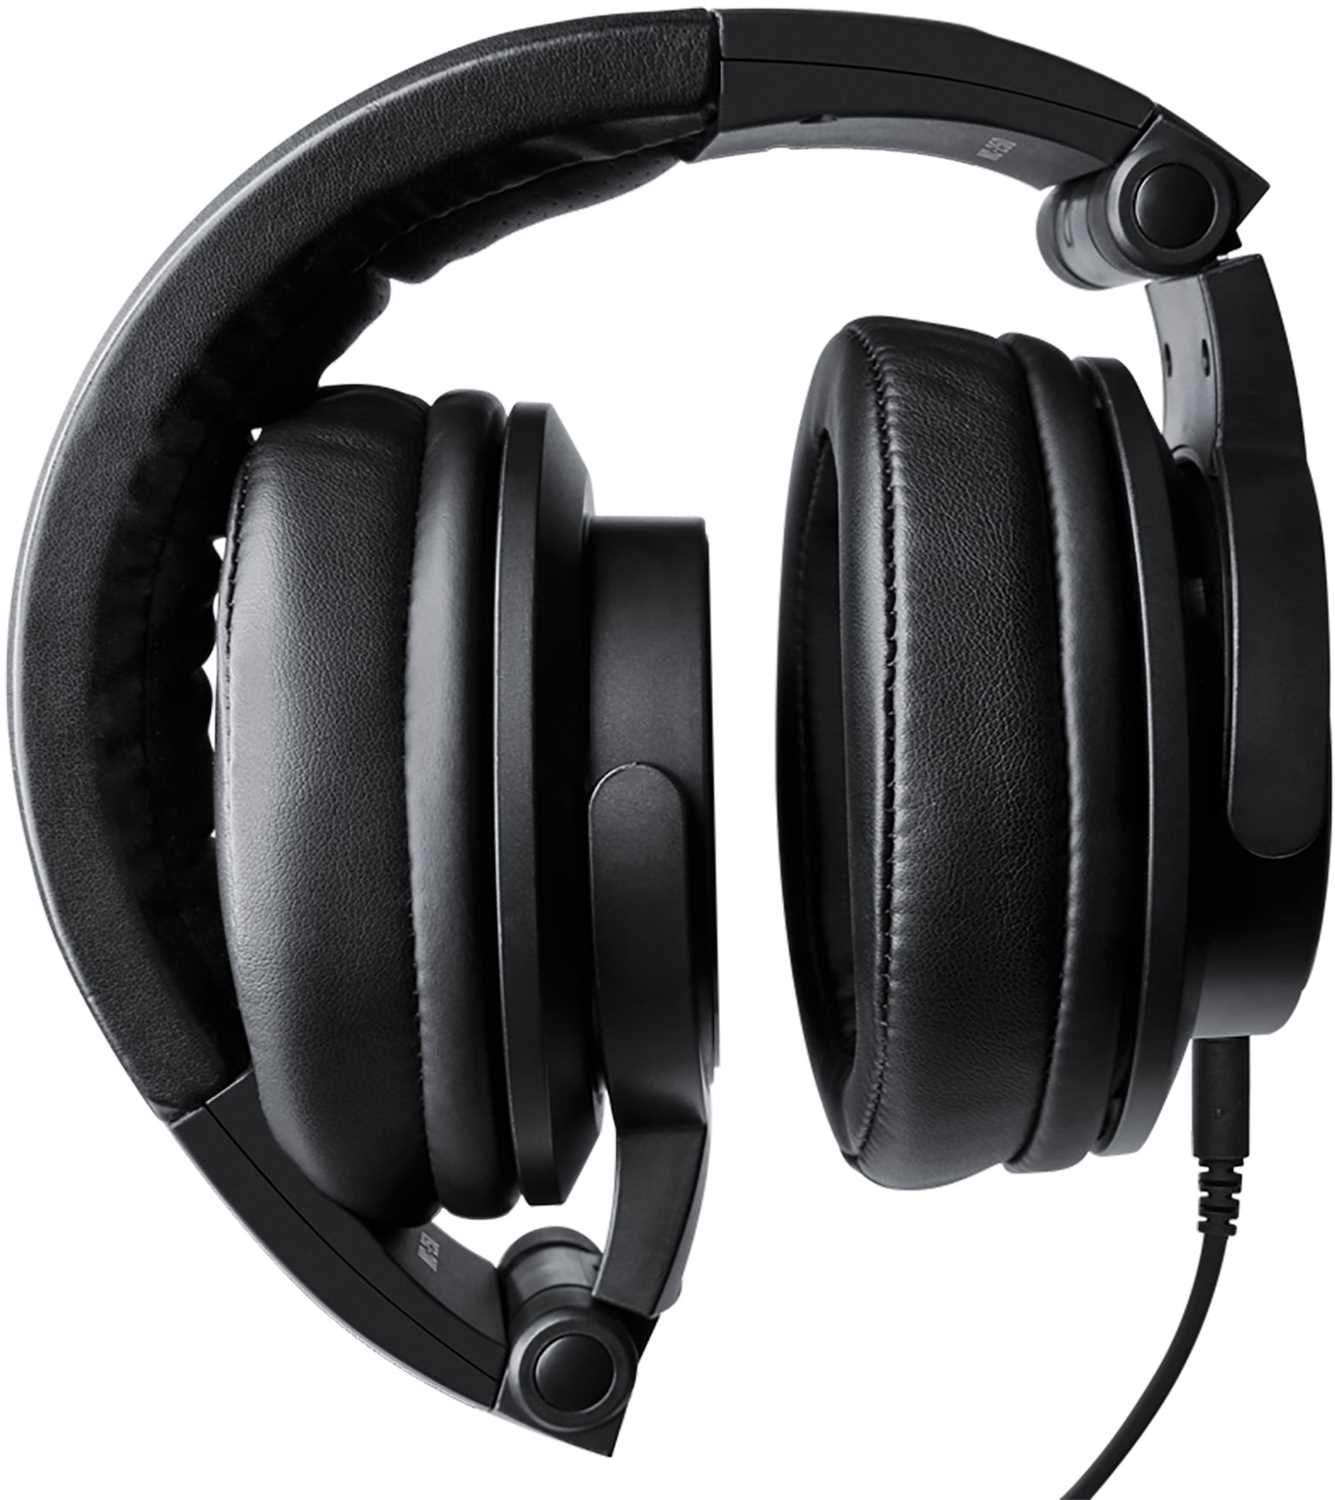 Mackie MC-250 Professional Closed-Back Headphones - PSSL ProSound and Stage Lighting